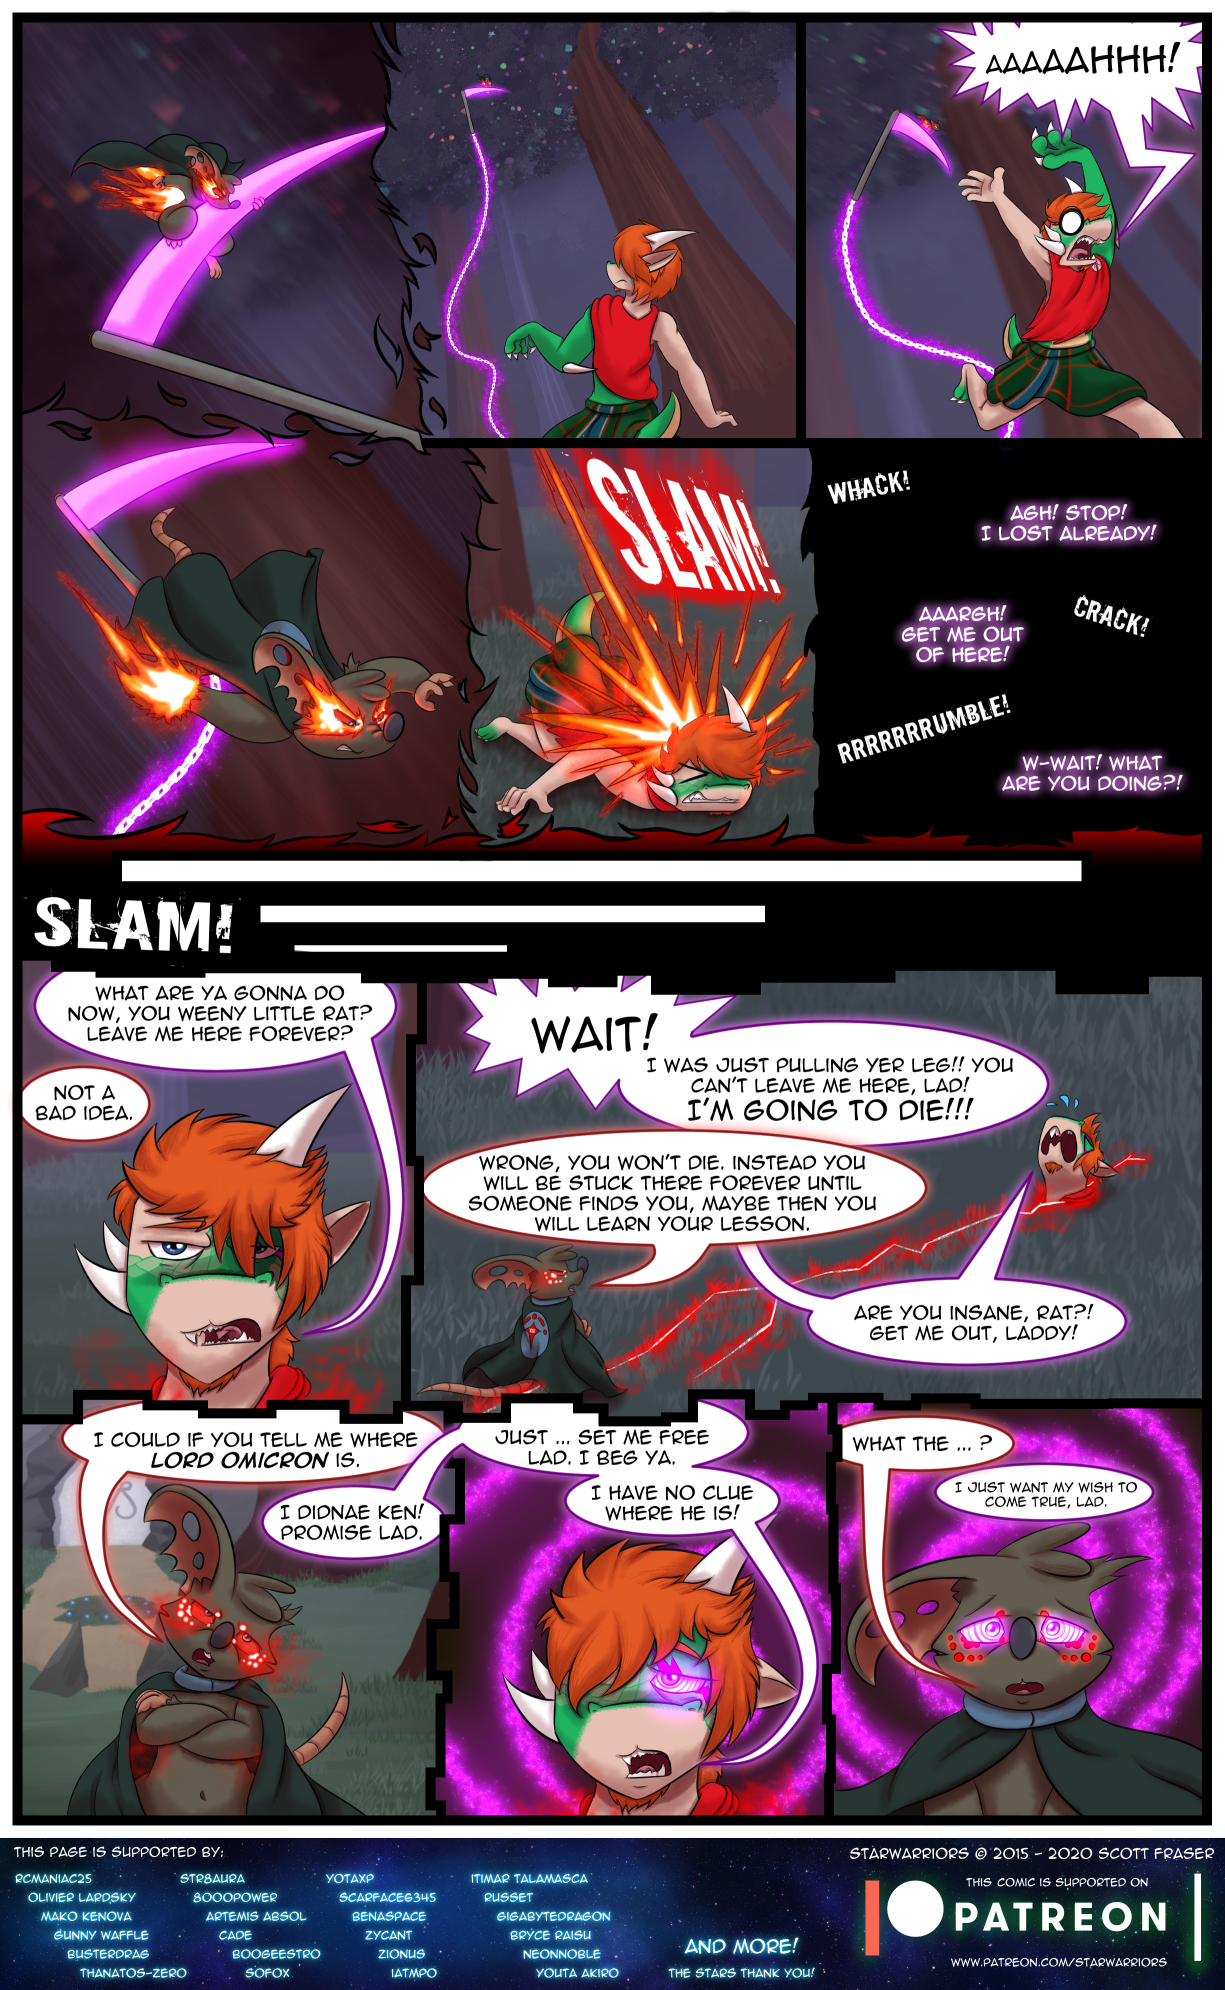 Ch5 Page 17 – Defeat